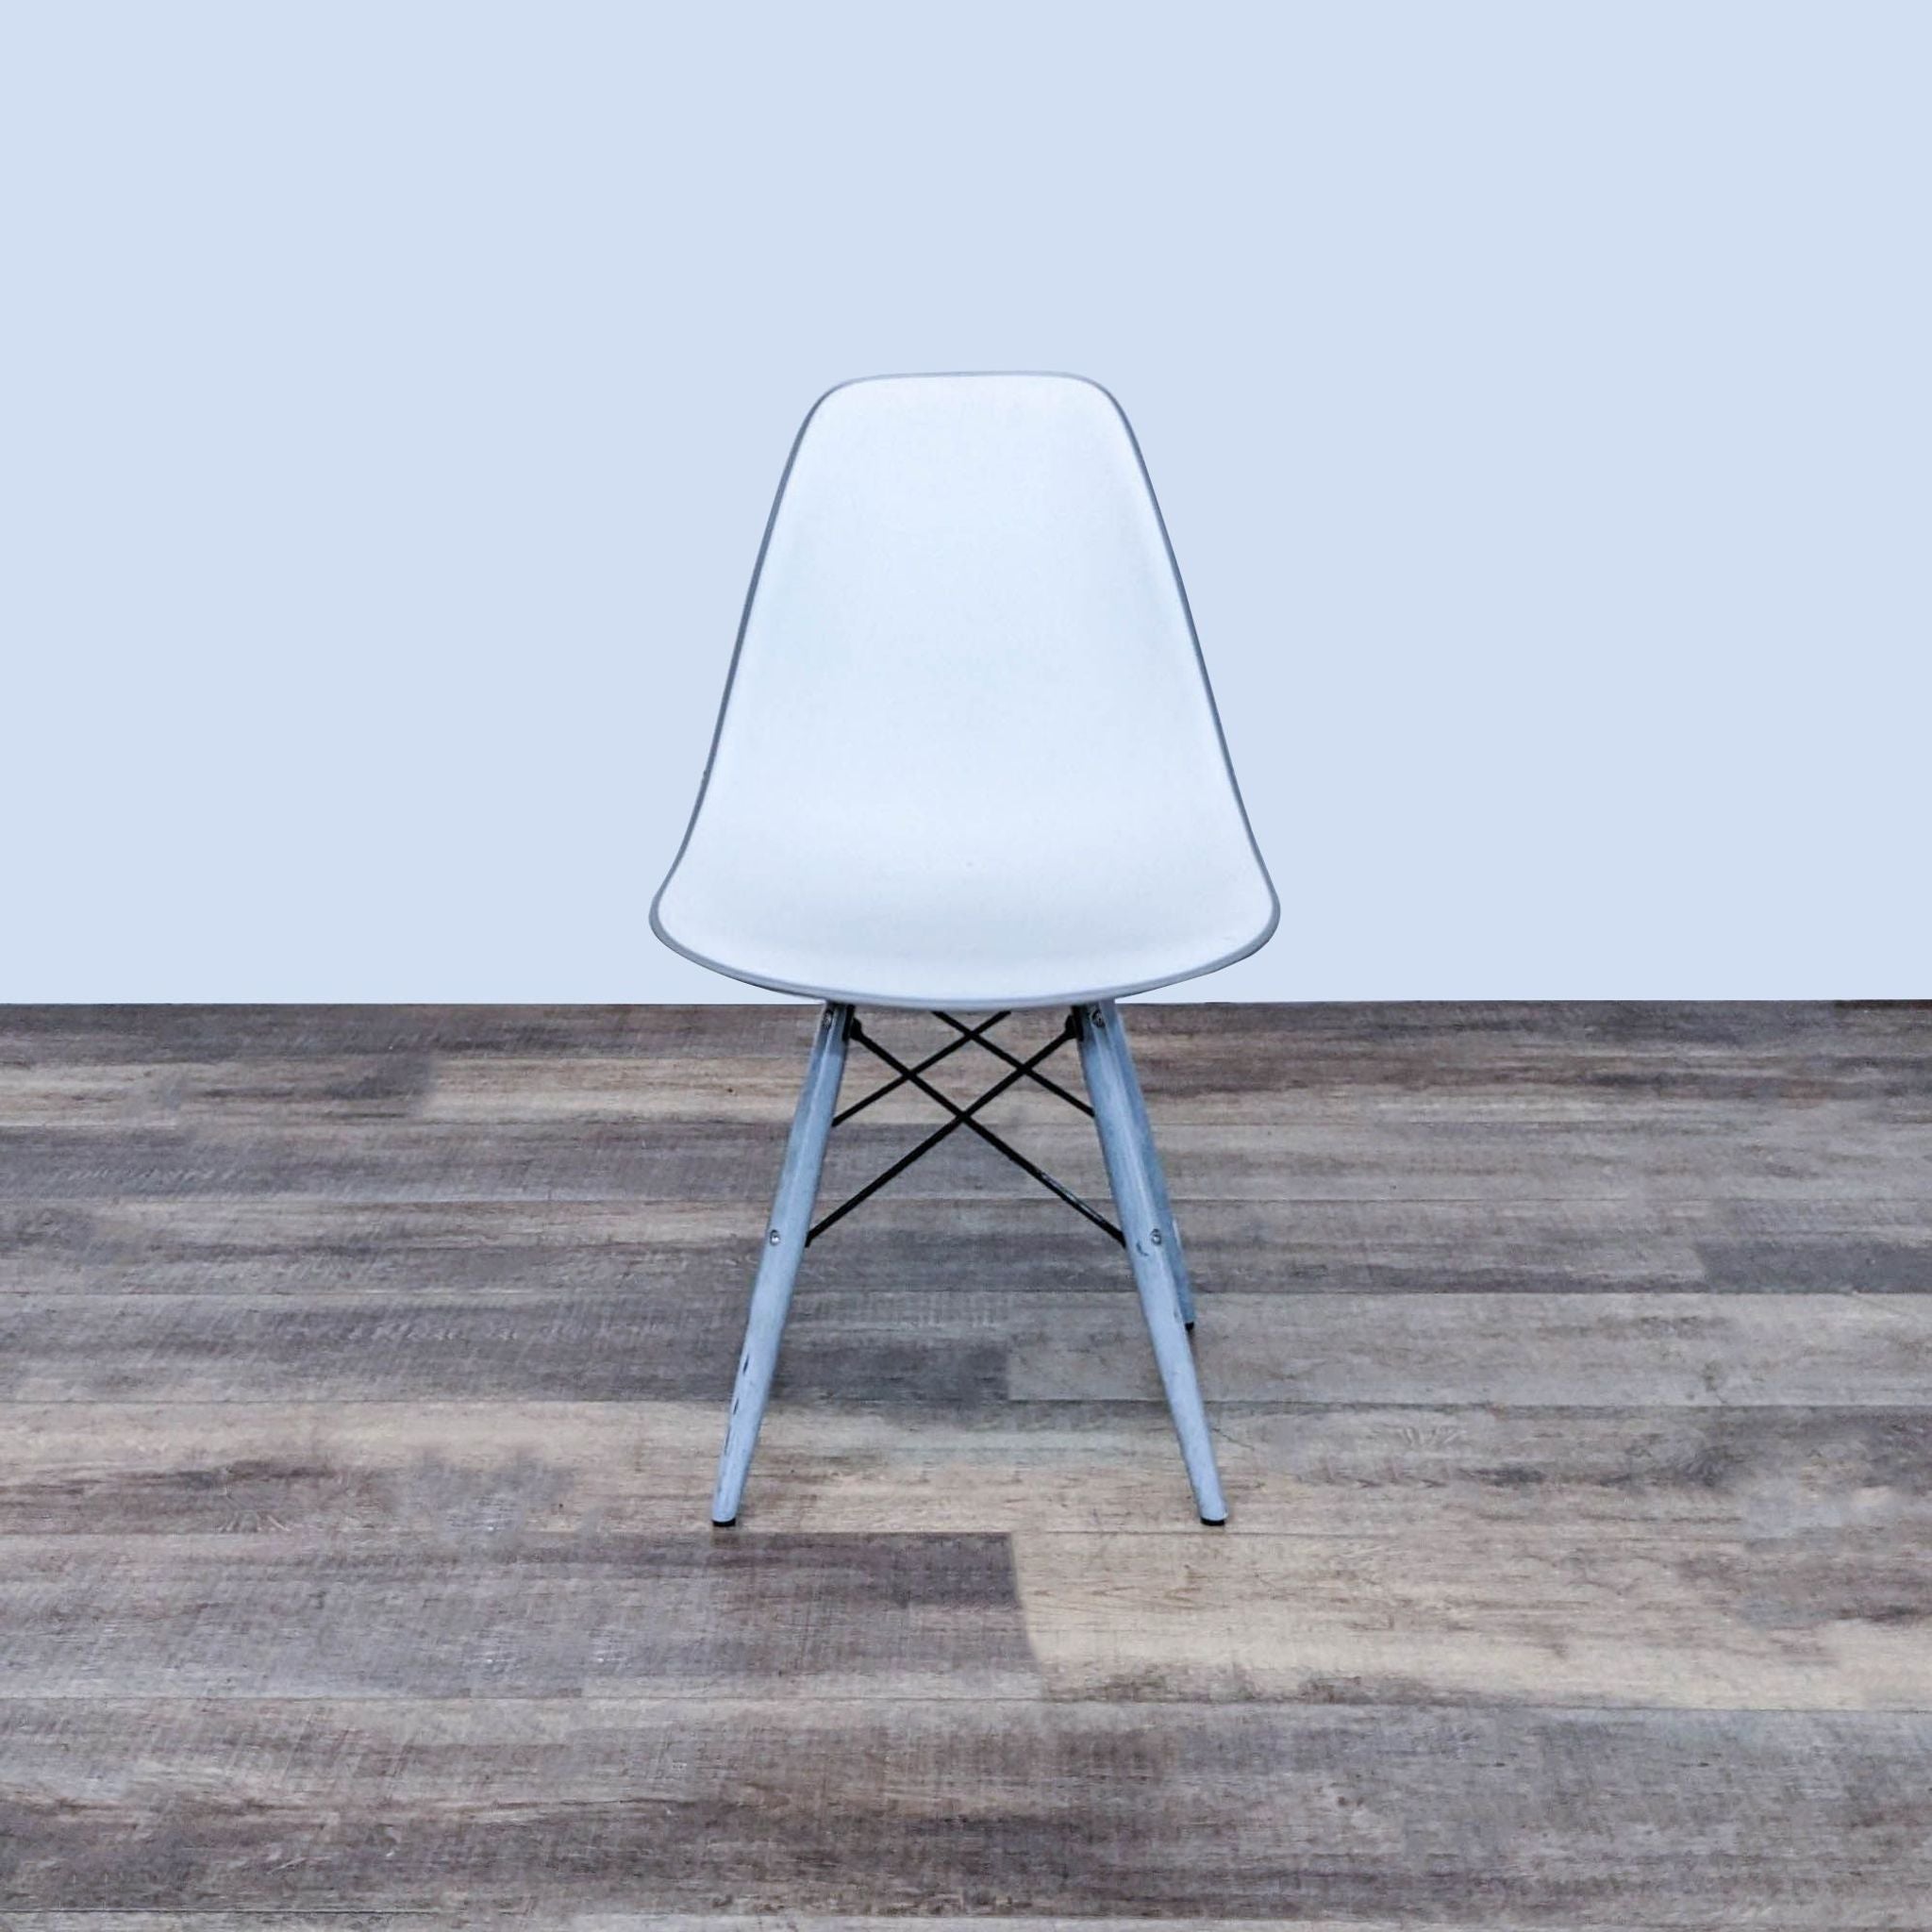 Reperch brand two-toned dining chair with contoured seat and wooden legs with metal Eiffel base on wooden floor.